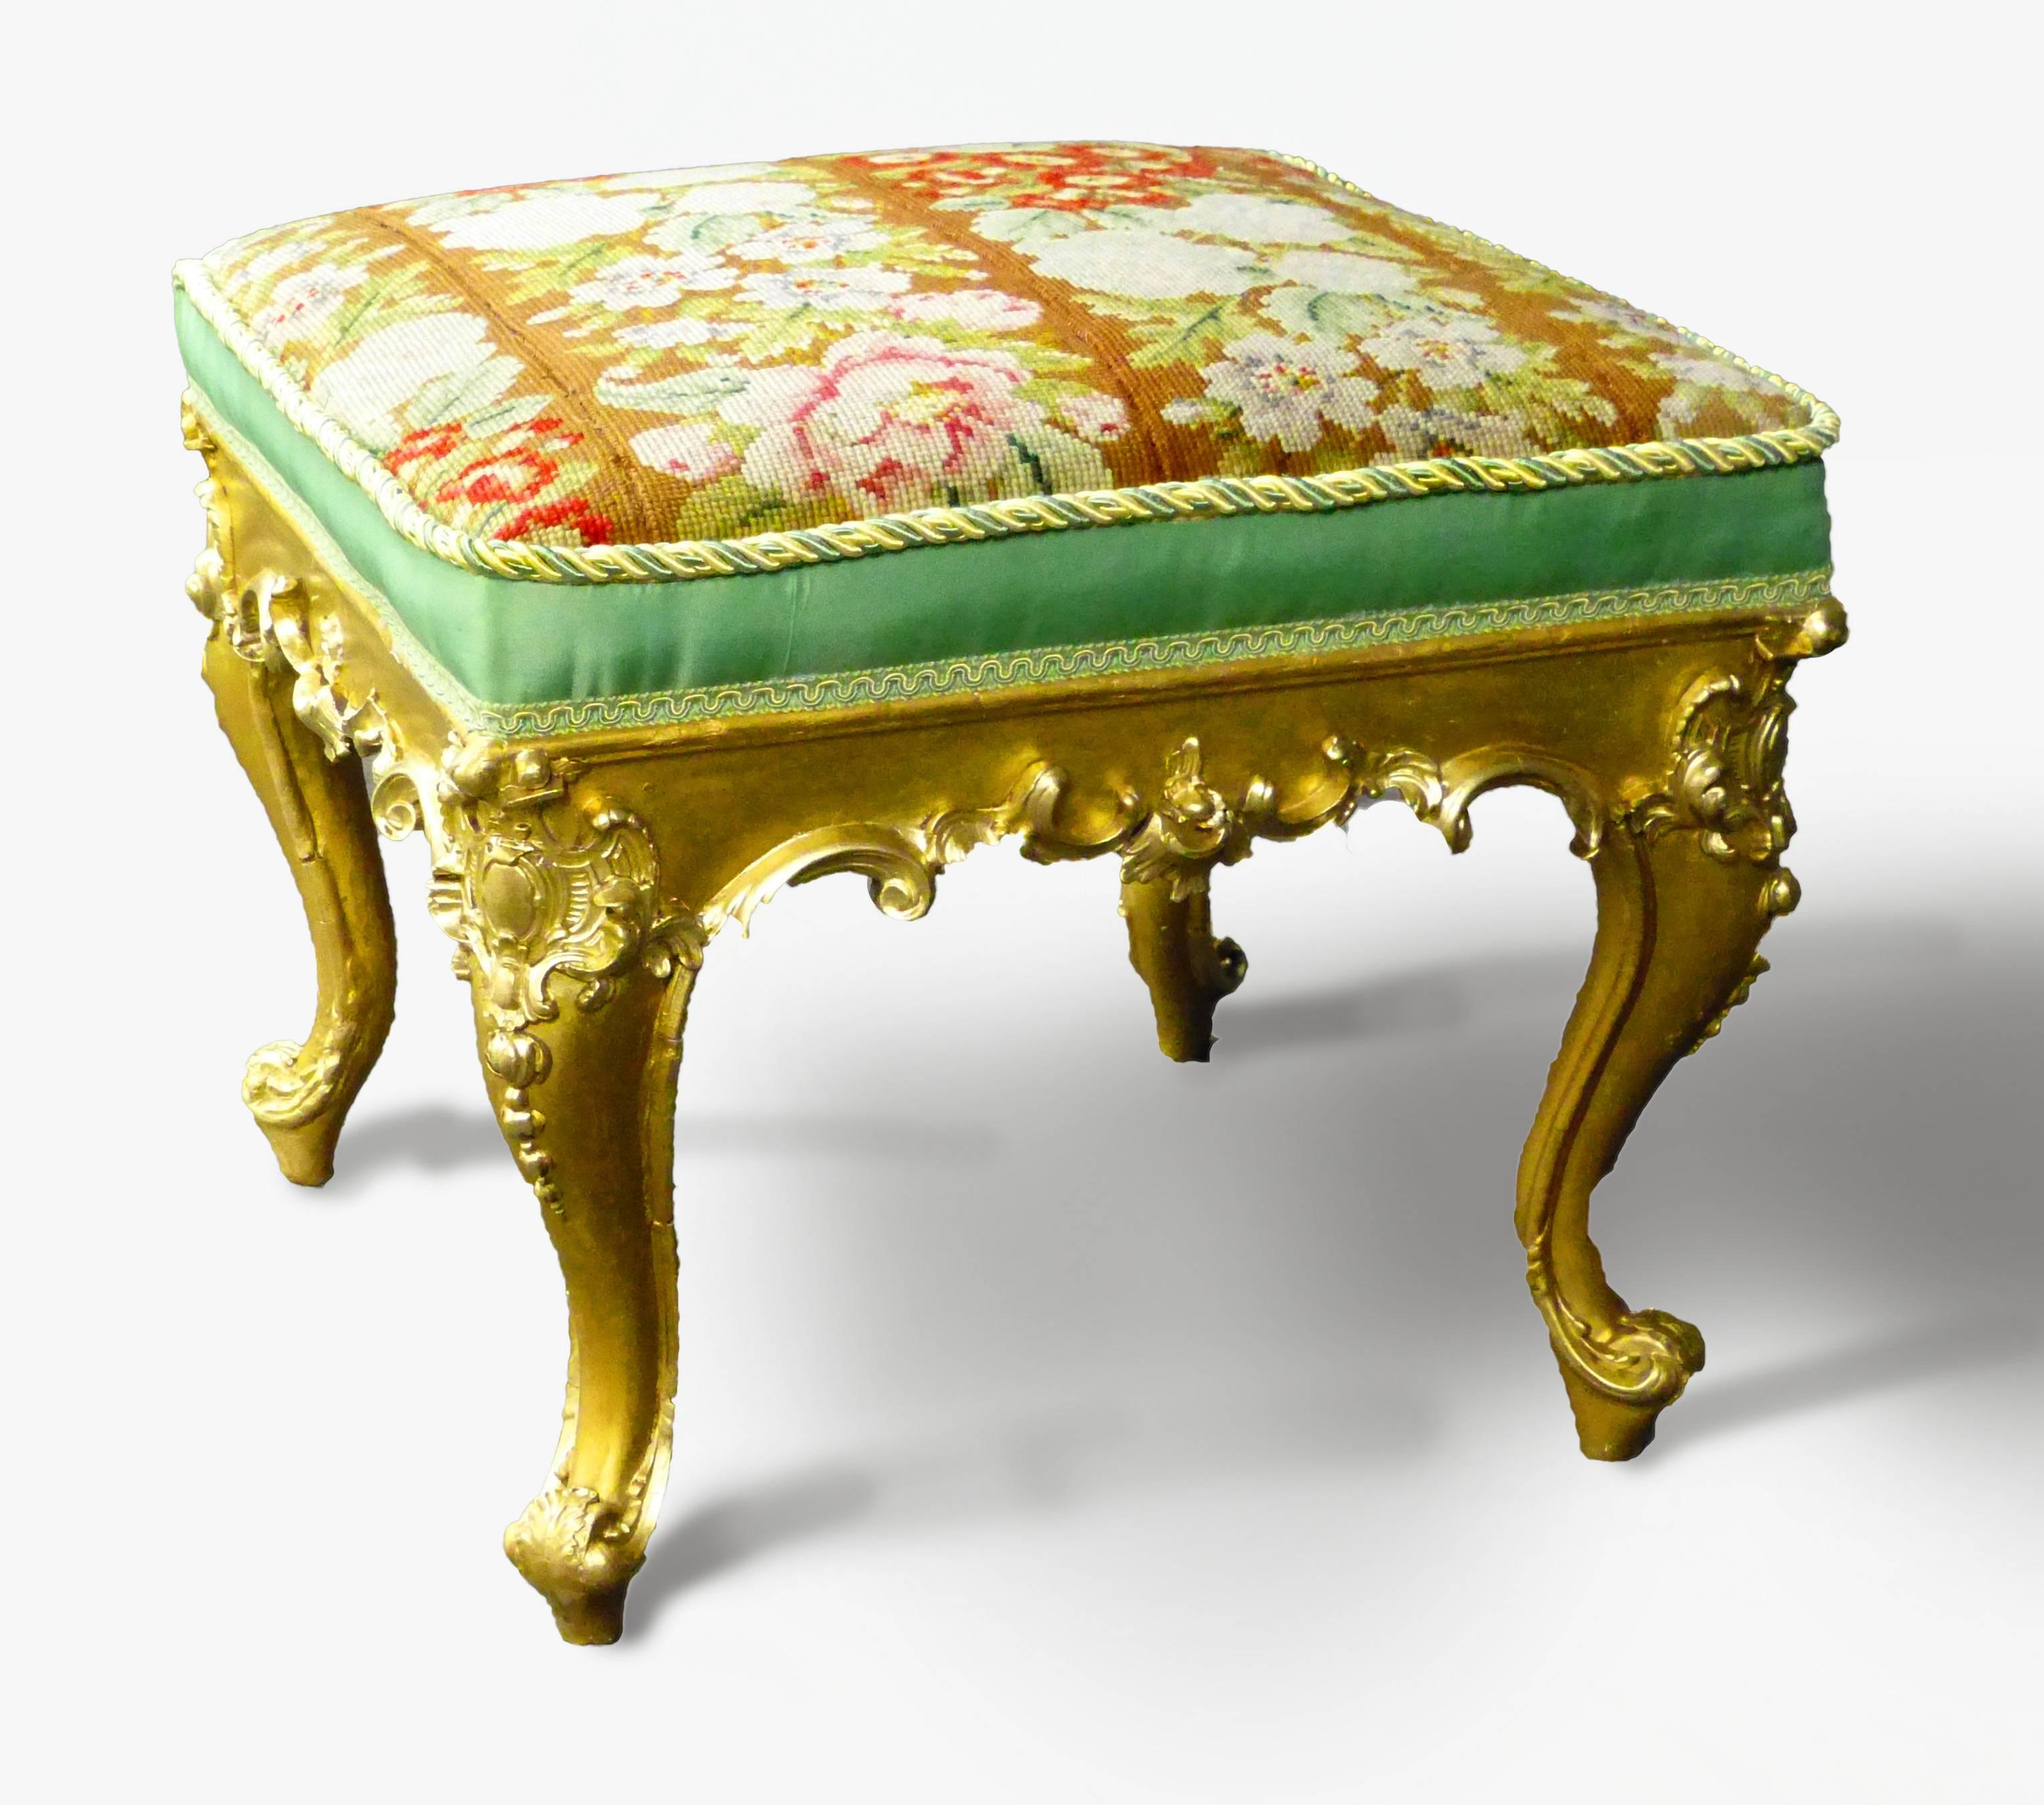 Attractive French stool in the Louis XV style with gilt over intricately carved wood with four cabriole legs upholstered in petit point over green satin. In excellent restored condition.

We specialise in shipping globally by Air.